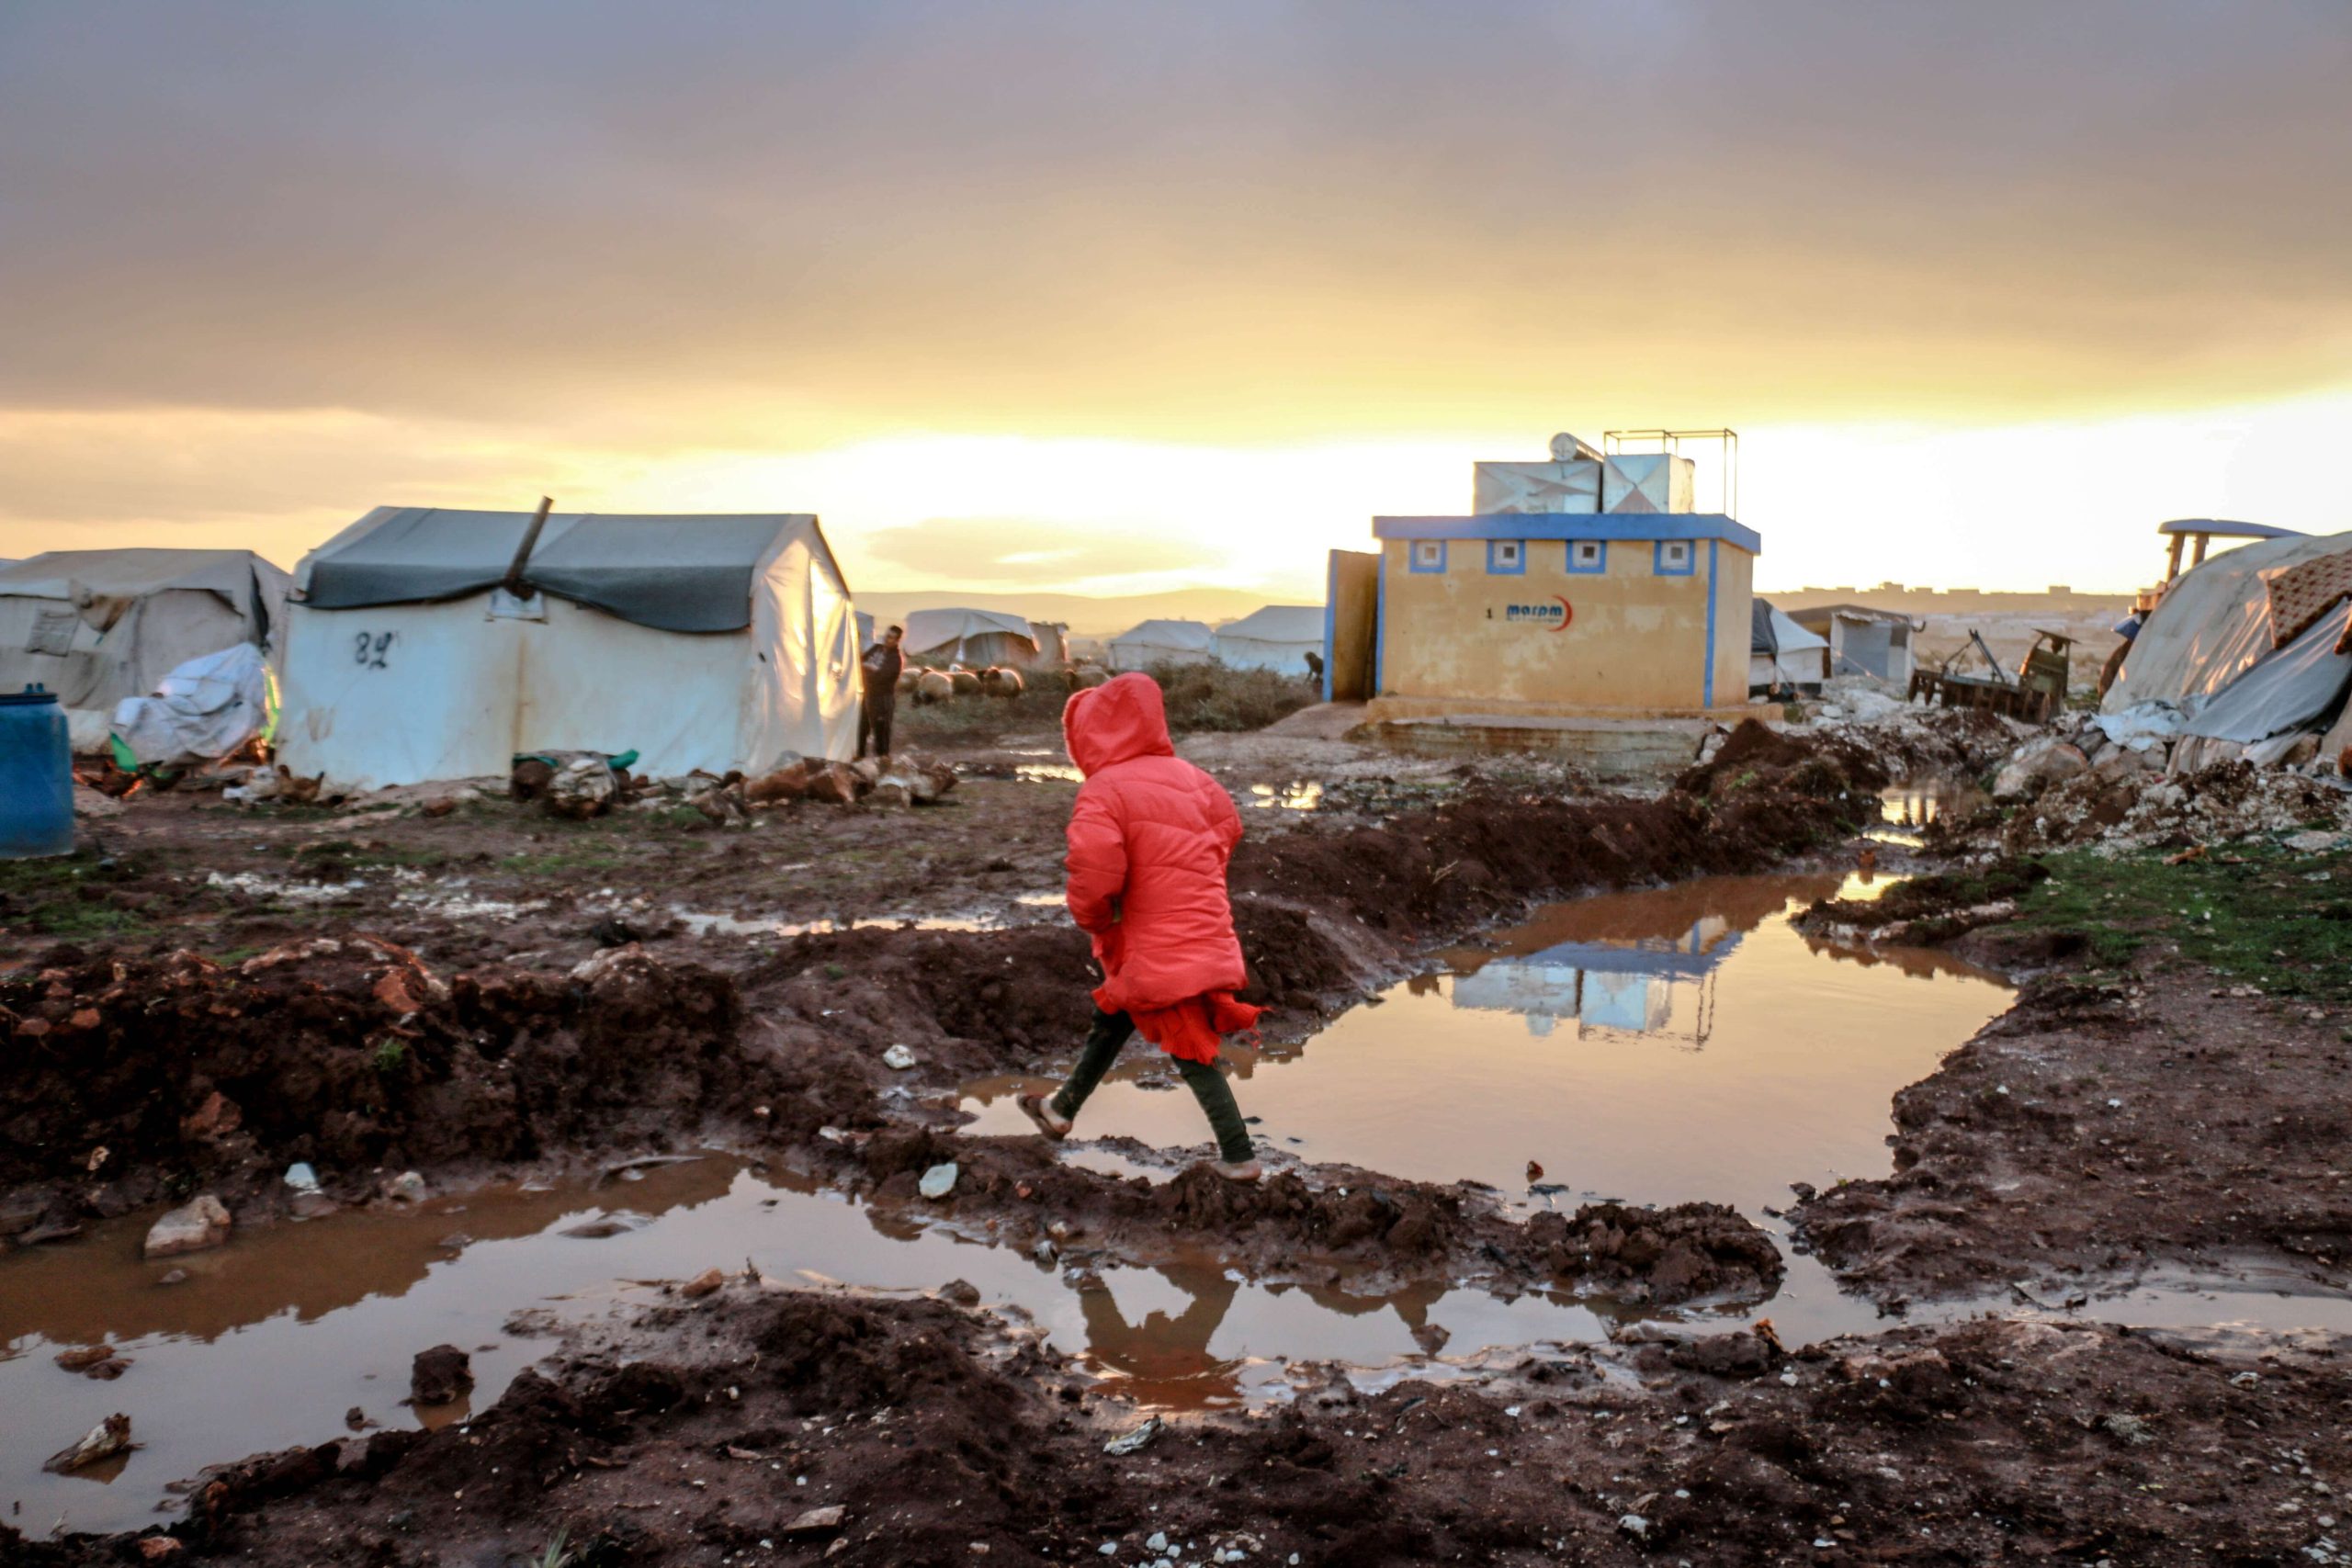 Winter in Refugee camps